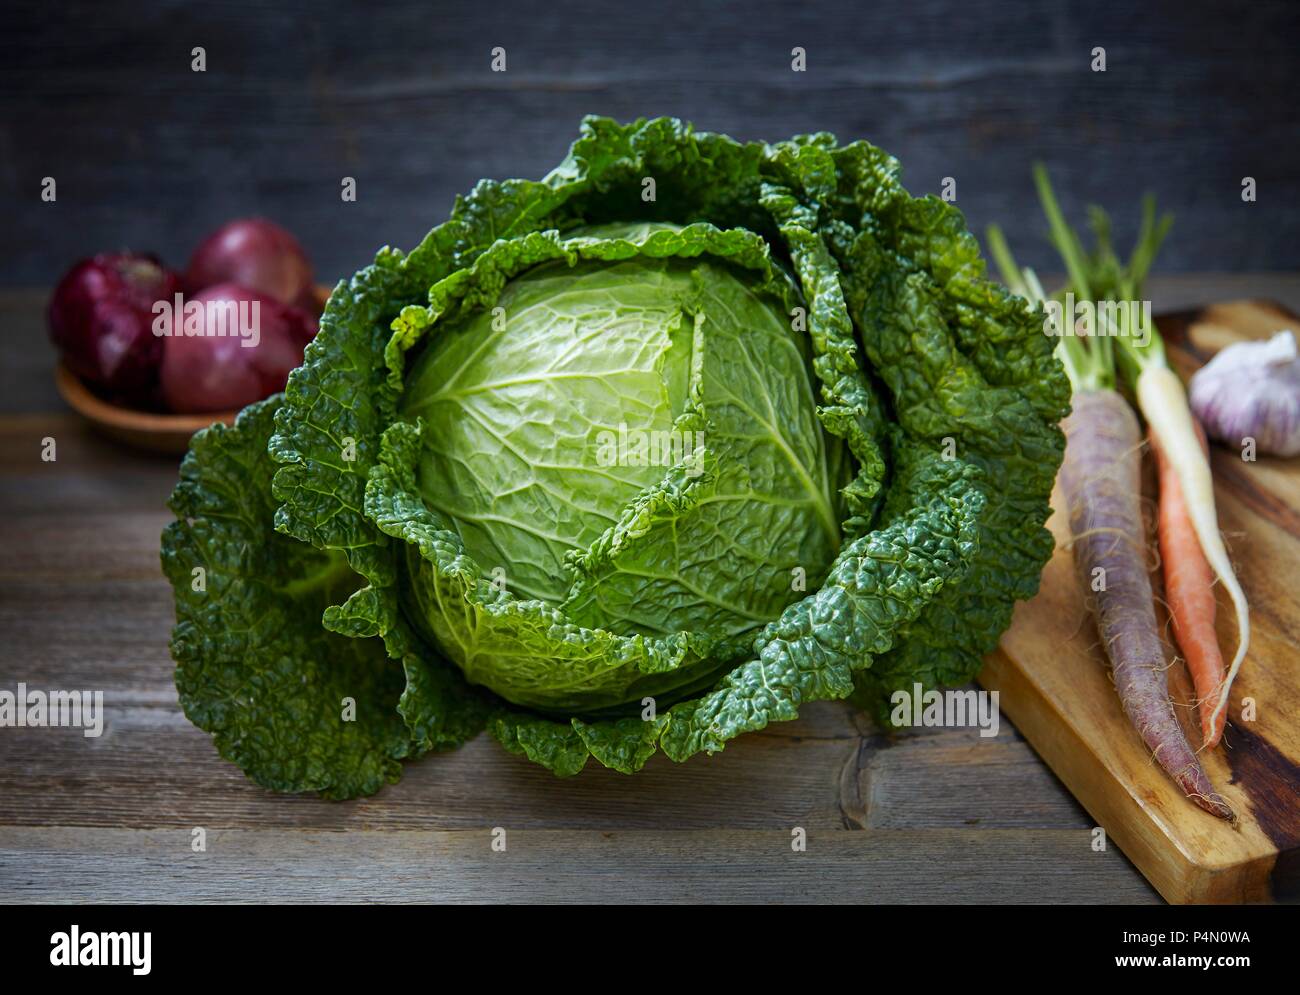 A savoy cabbage Stock Photo